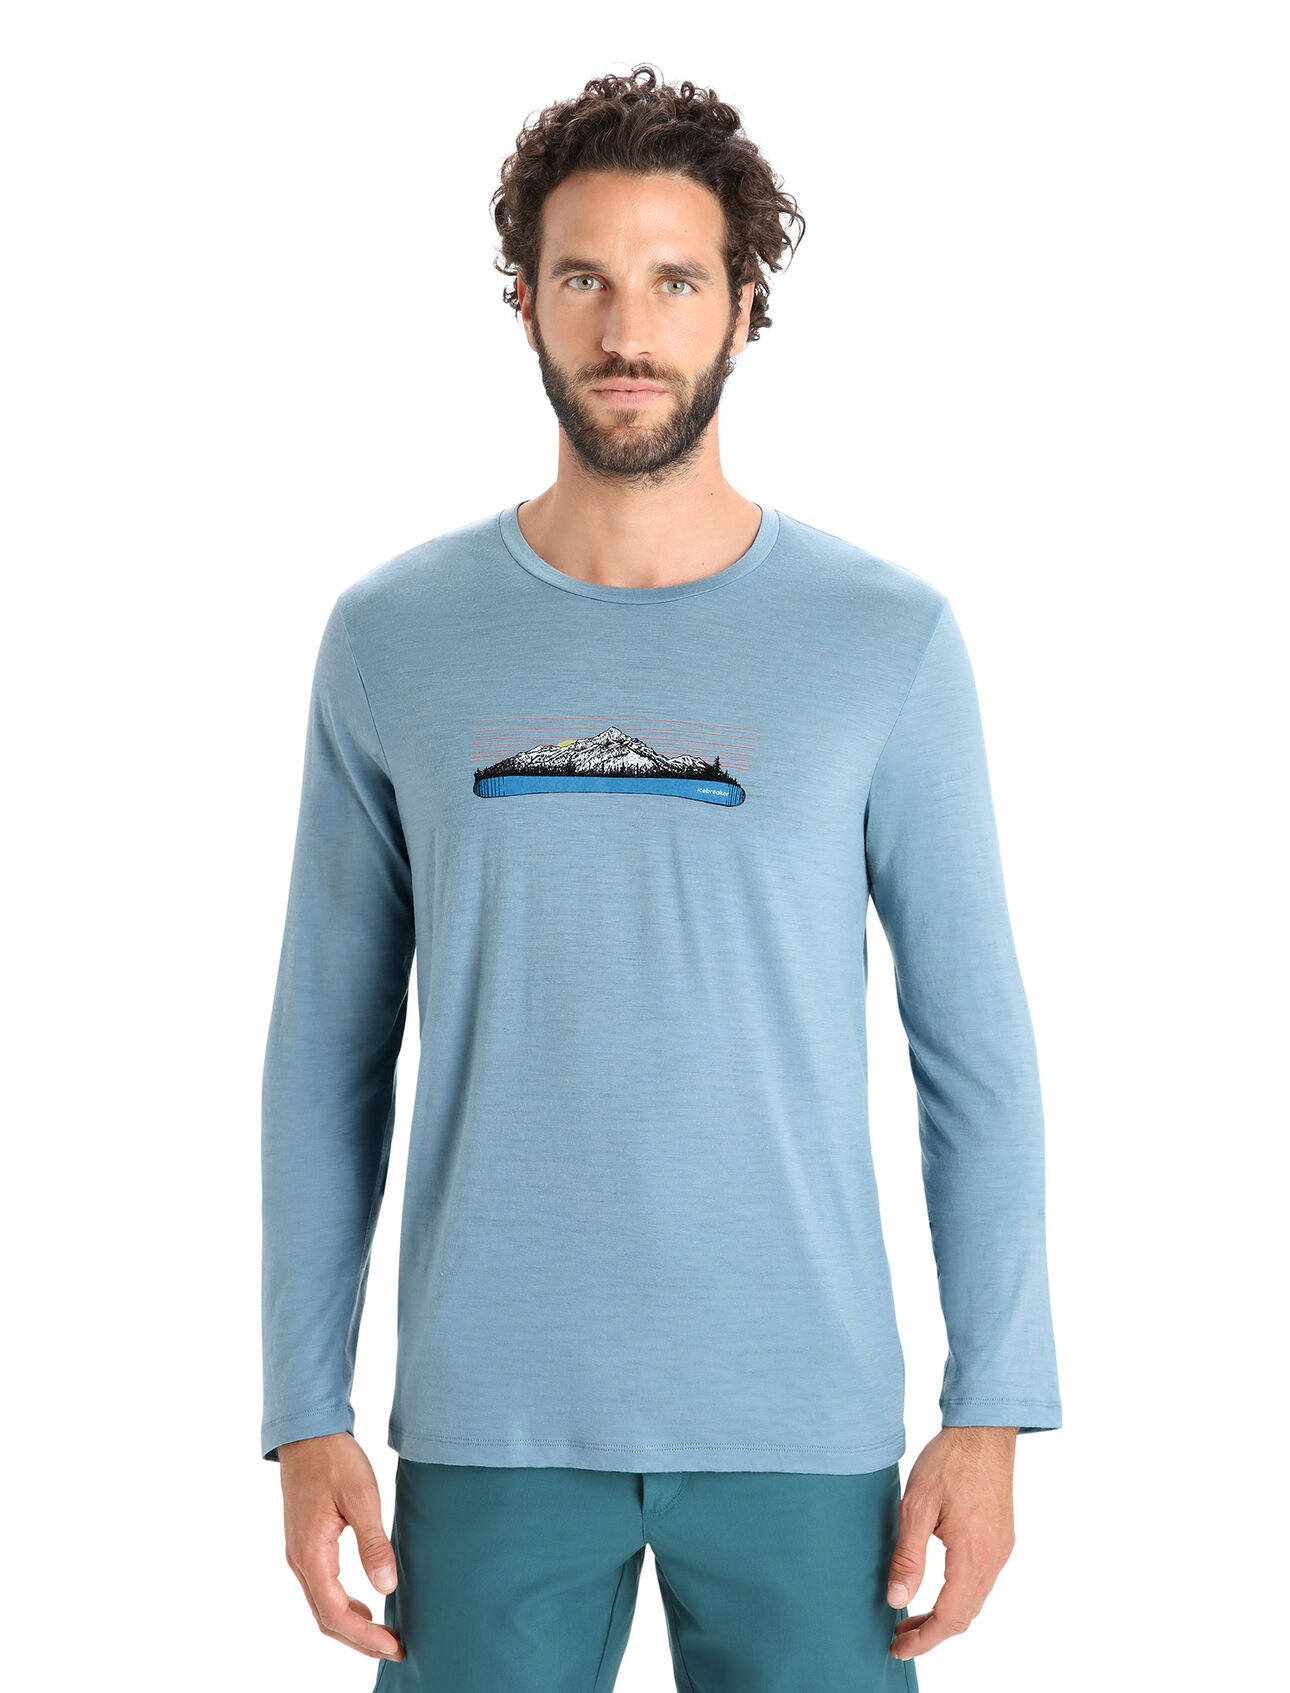 Mens Merino Tech Lite II Long Sleeve T-Shirt Ski Fields Our versatile tech tee that provides comfort, breathability and natural odour-resistance for any adventure you can think of, the Tech Lite II Long Sleeve Tee Ski Fields features 100% merino for all-natural performance. The original artwork by Damon Watters features a retro-inspired graphic of the sun rising on another perfect day of backcountry turns.